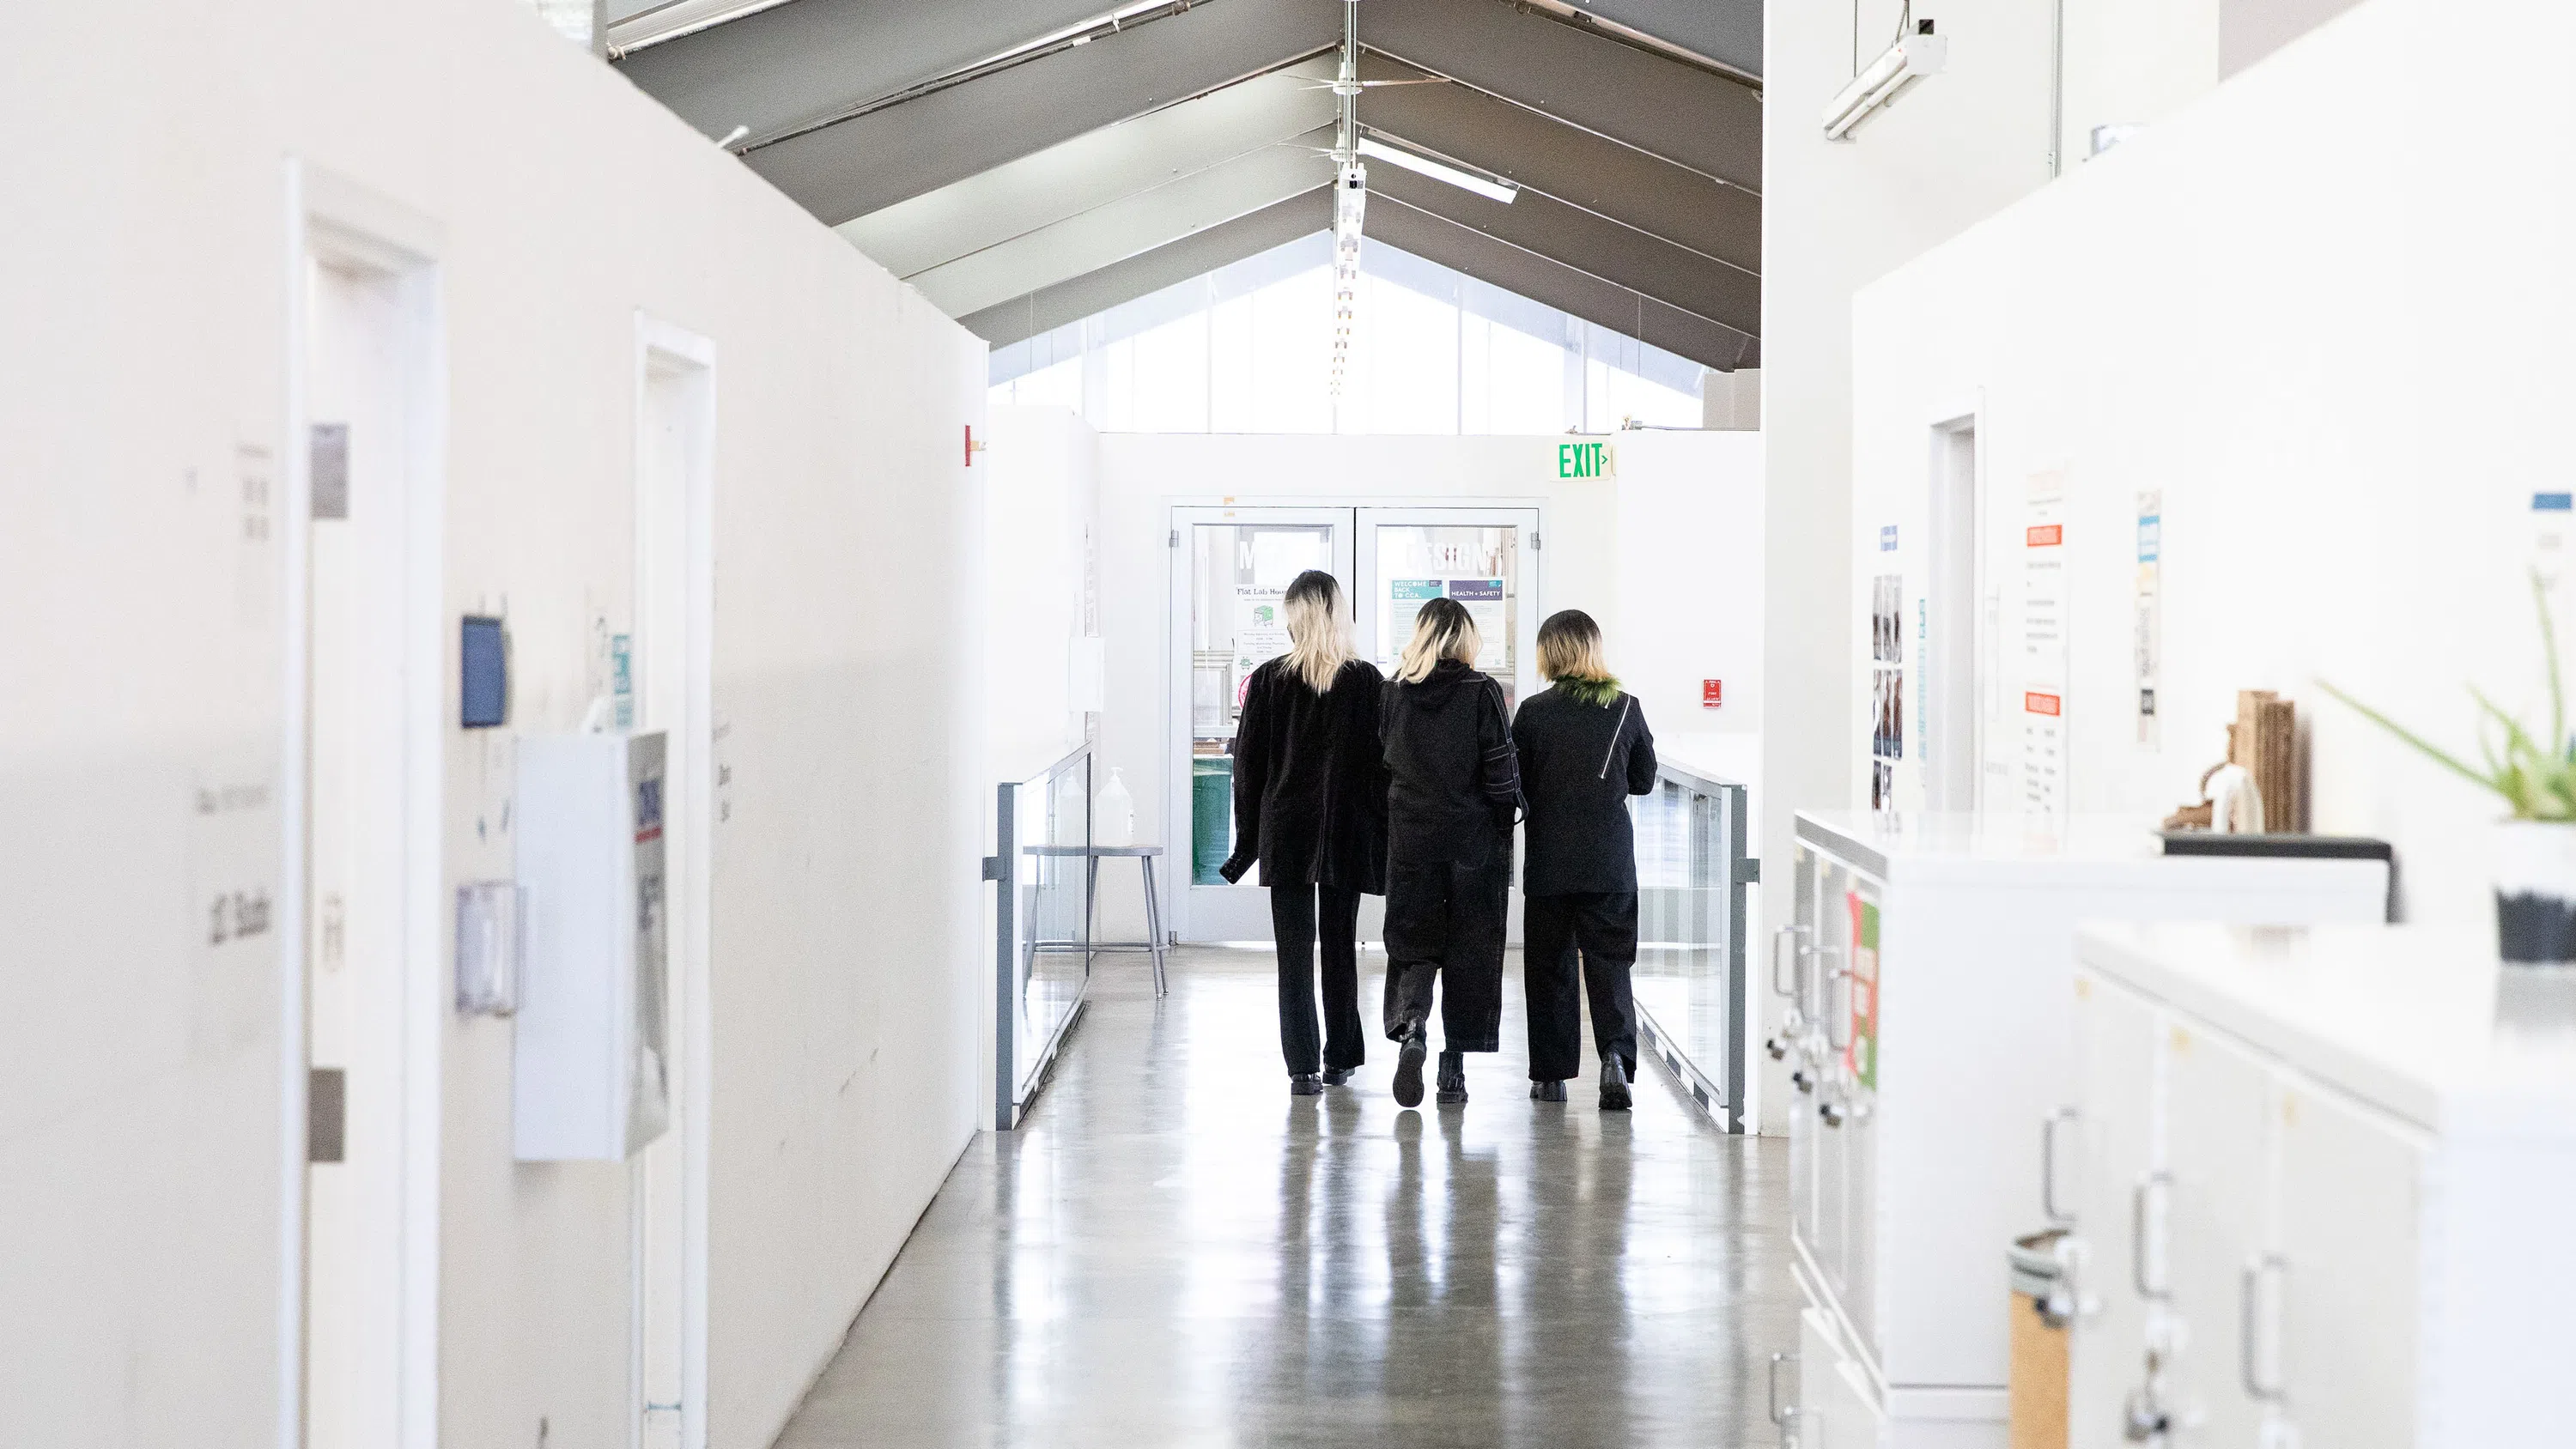 Three students dressed in black walk toward the end of a light-filled hallway. 